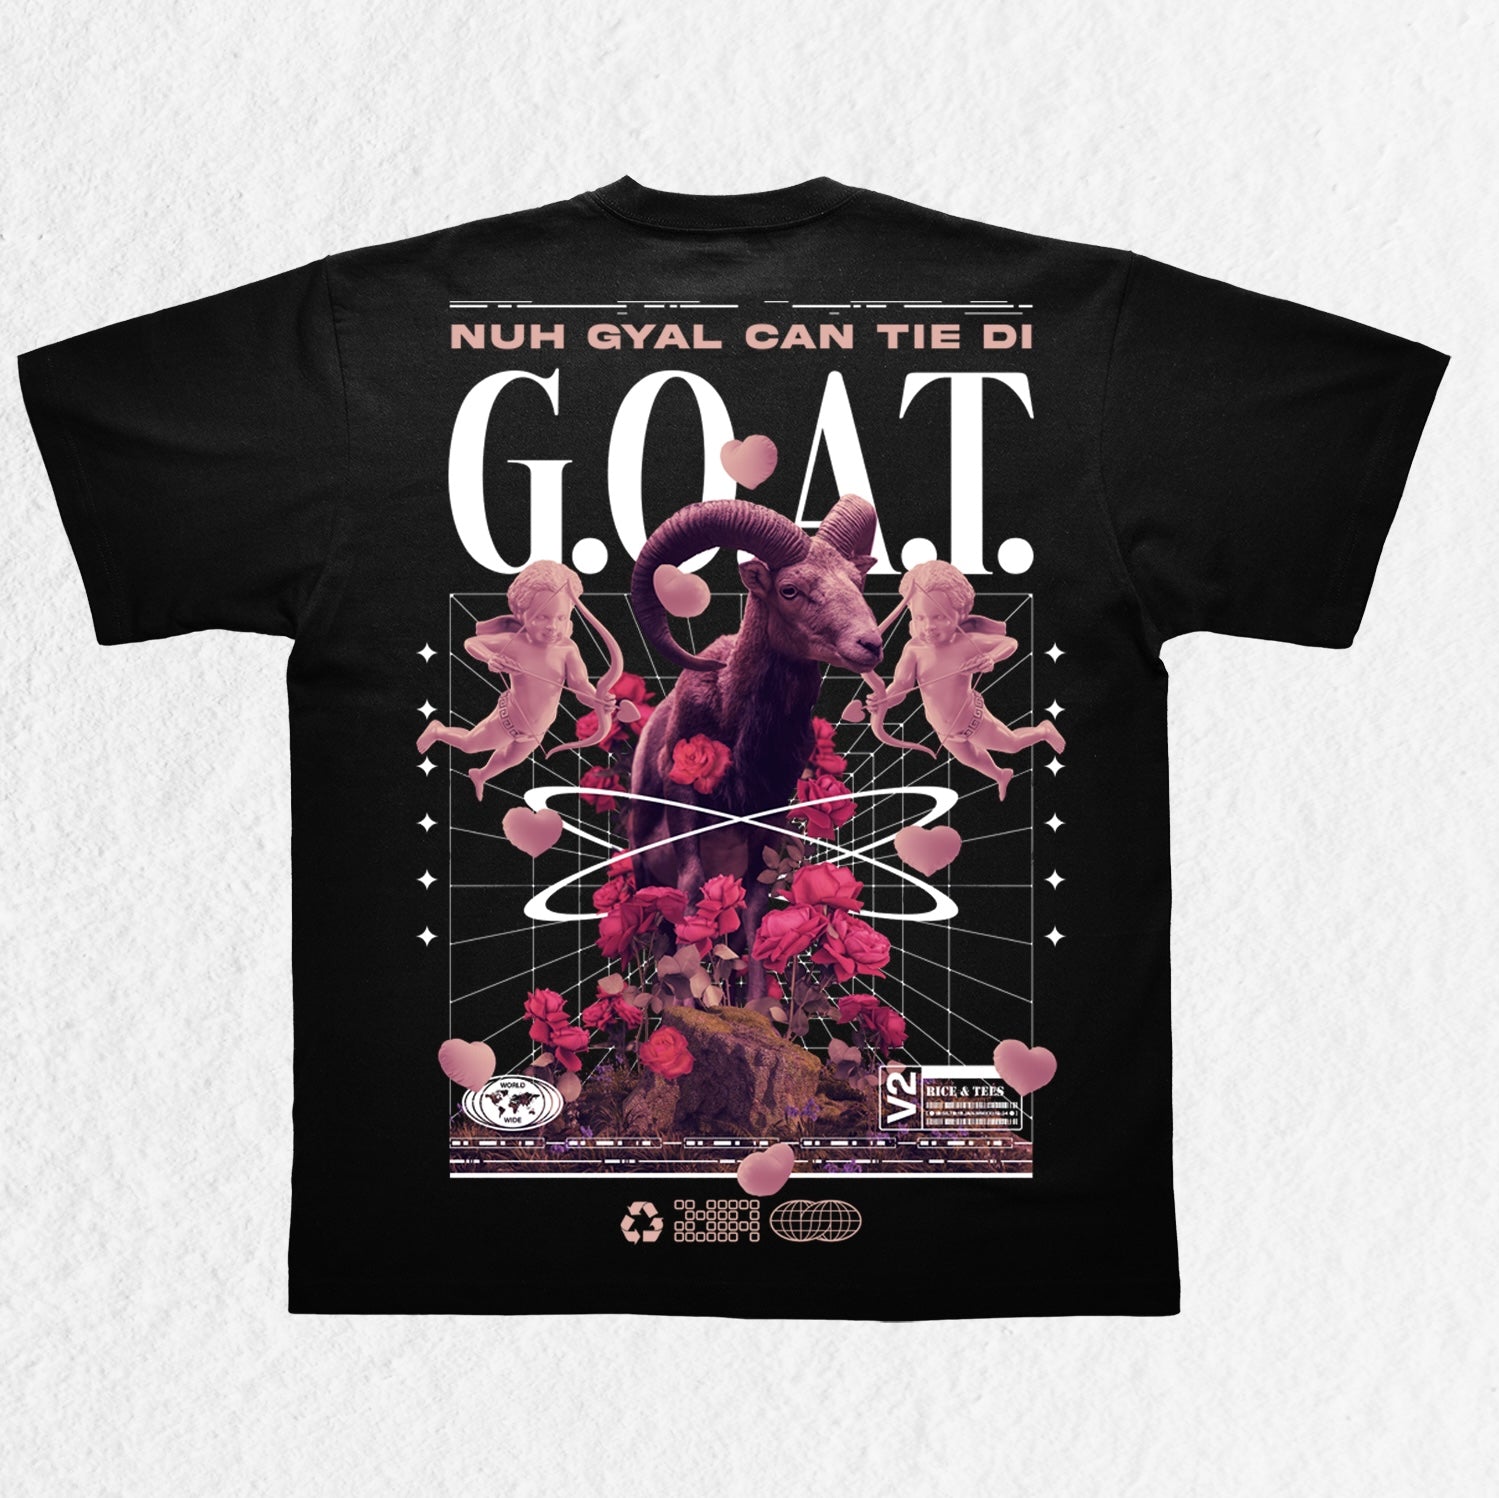 CAN’T TIE THE G.O.A.T Unisex oversized heavyweight t-shirt